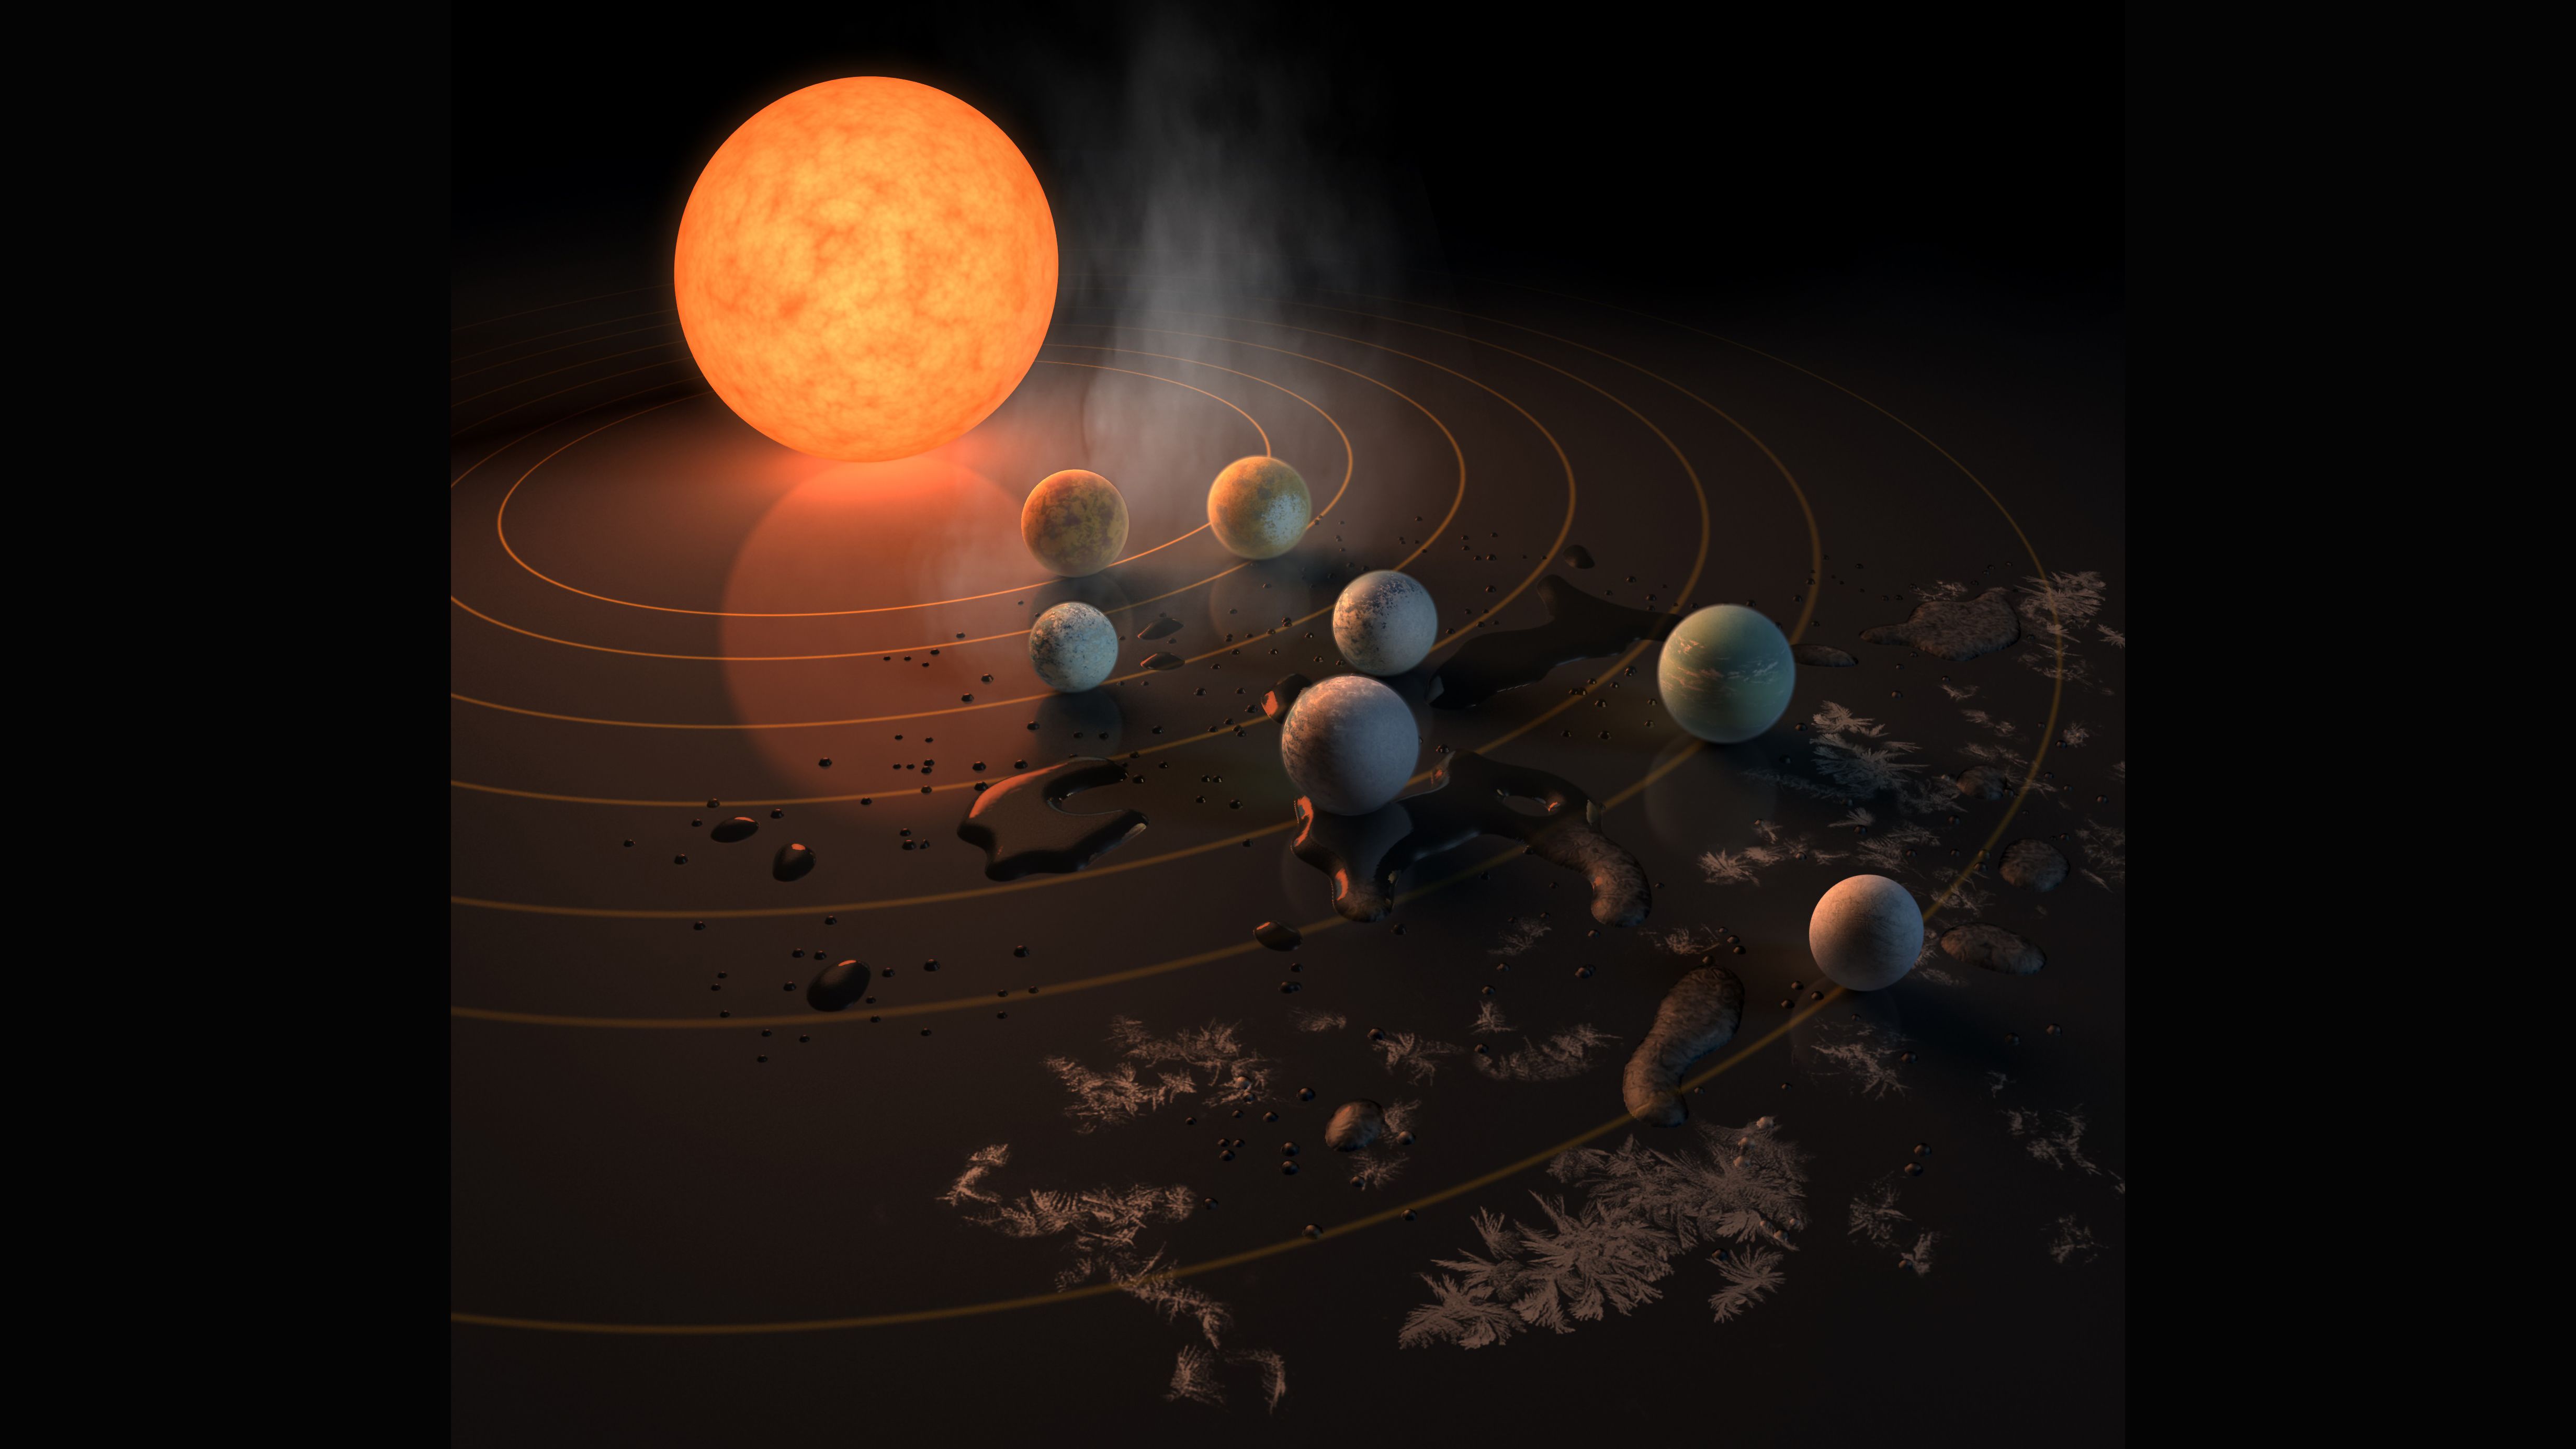 all discovered planets in order